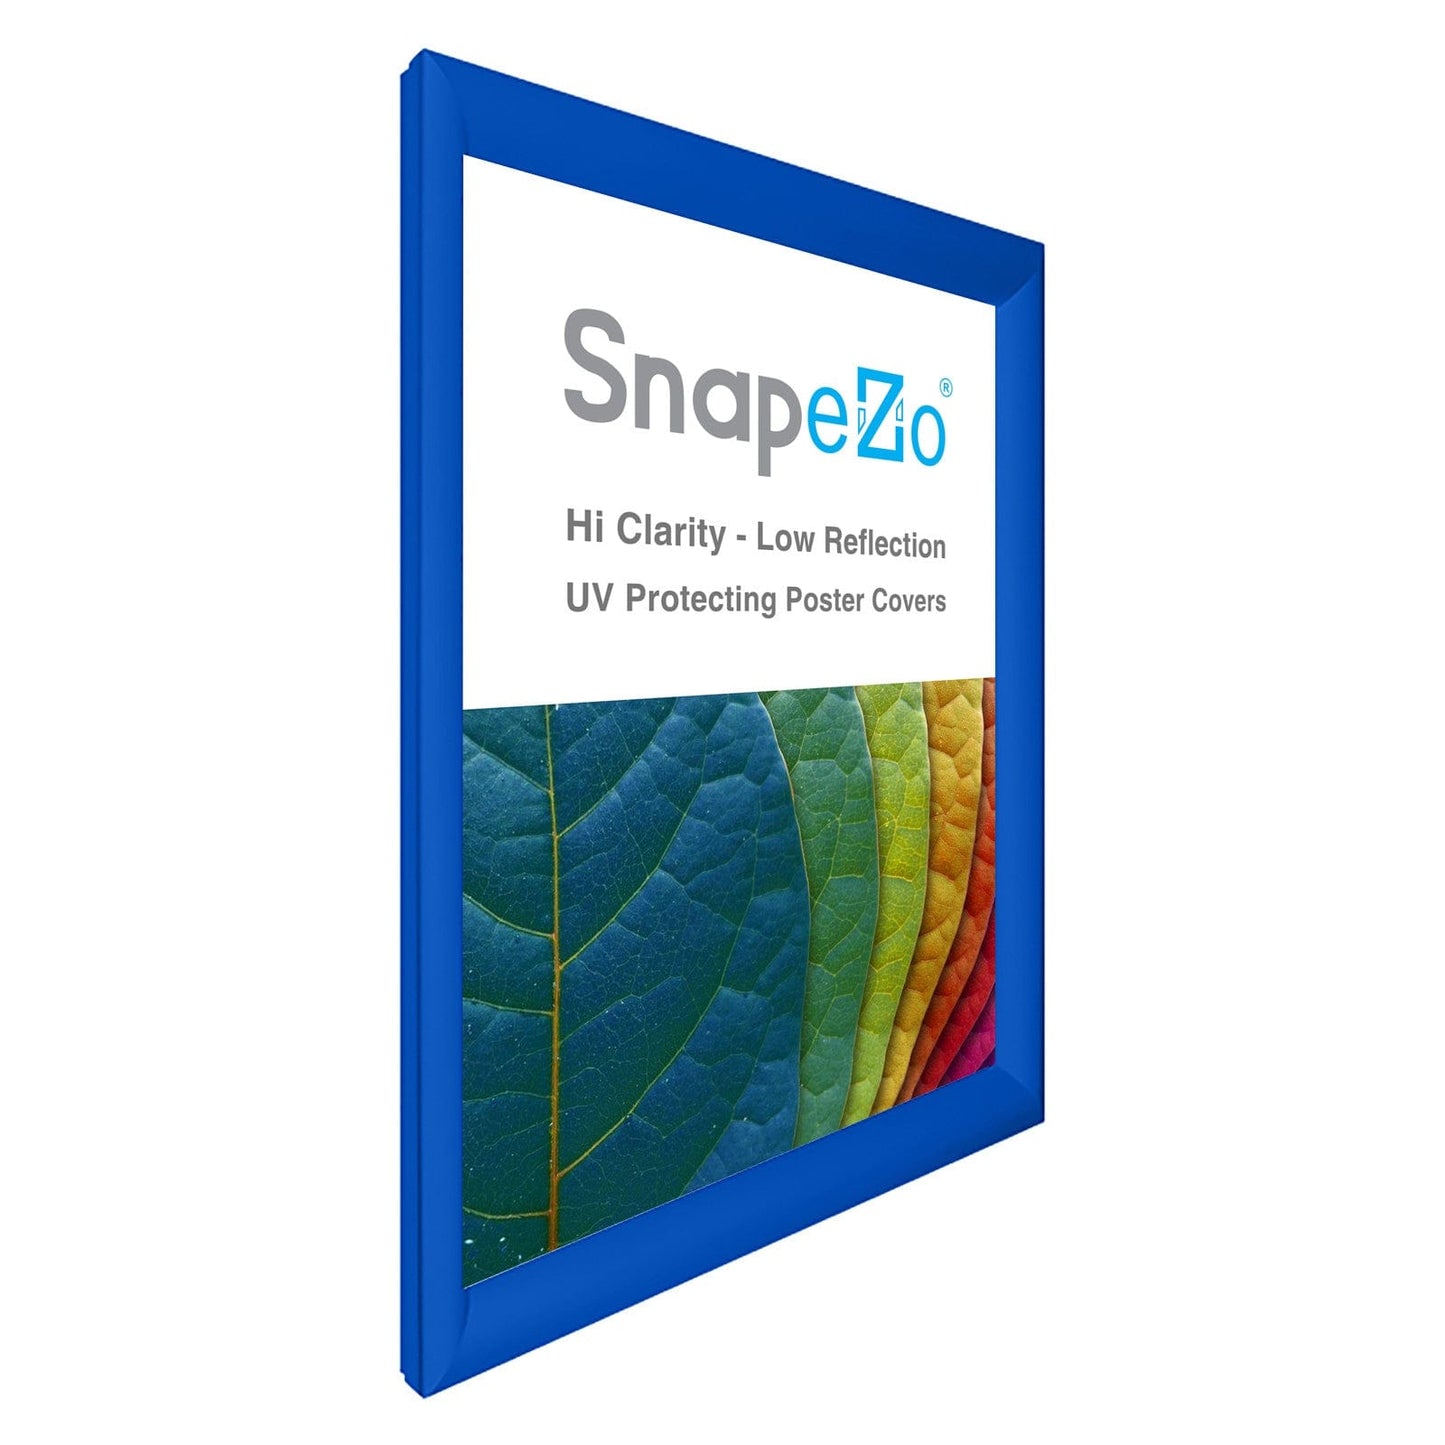 21x30 Blue SnapeZo® Snap Frame - 1.2" Profile - Snap Frames Direct